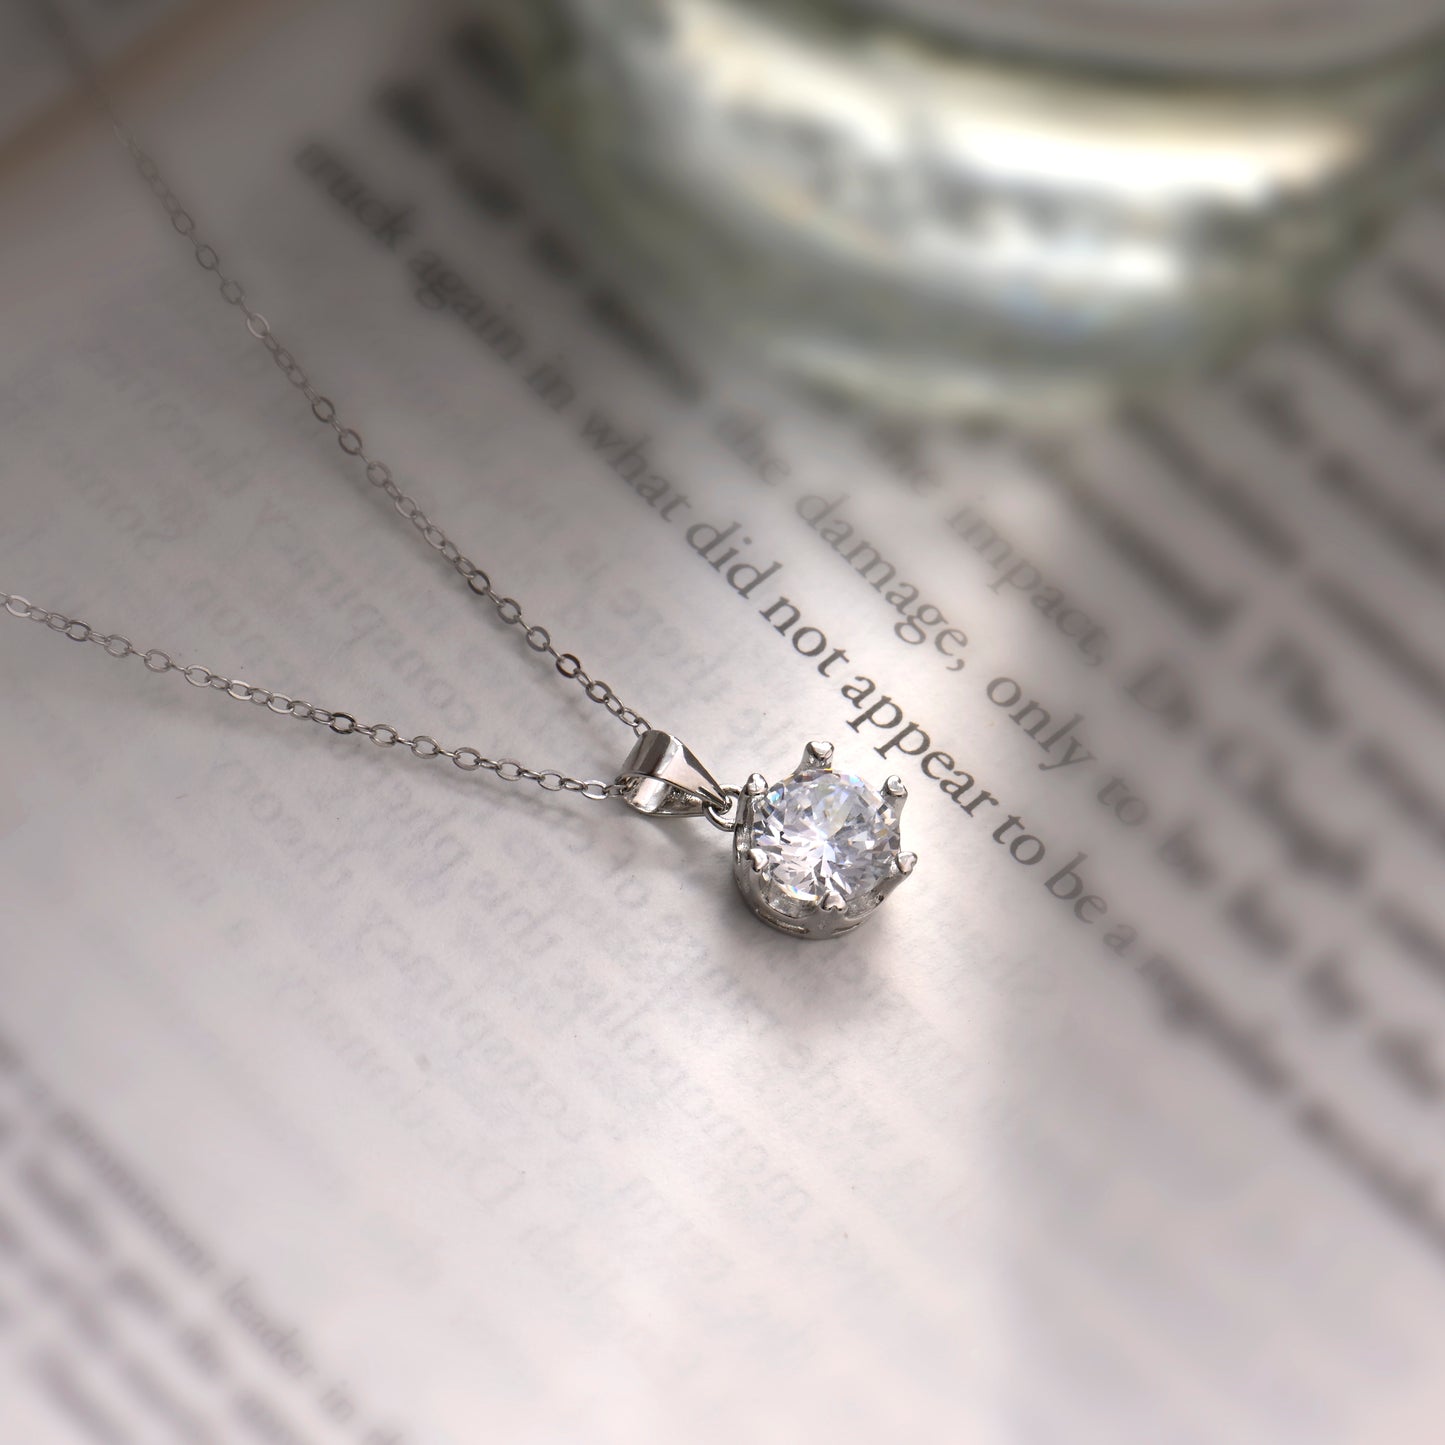 Silver Bold Solitaire Pendant with Link Chain